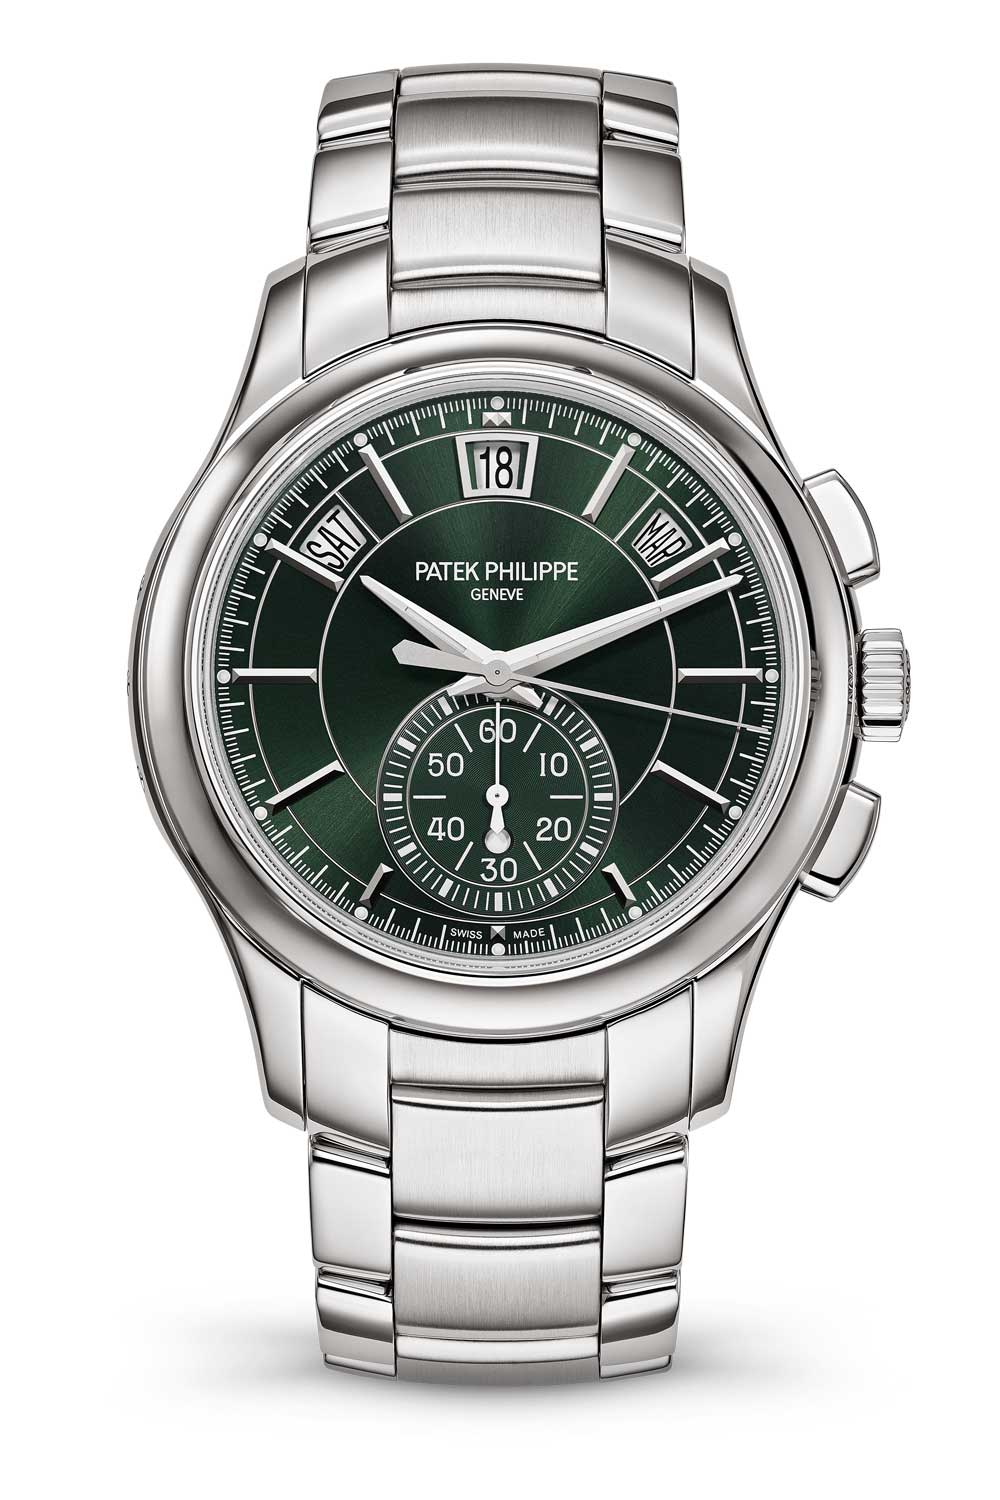 Reference 5905/1A-001 Self-winding Flyback Chronograph with Annual Calendar in stainless steel